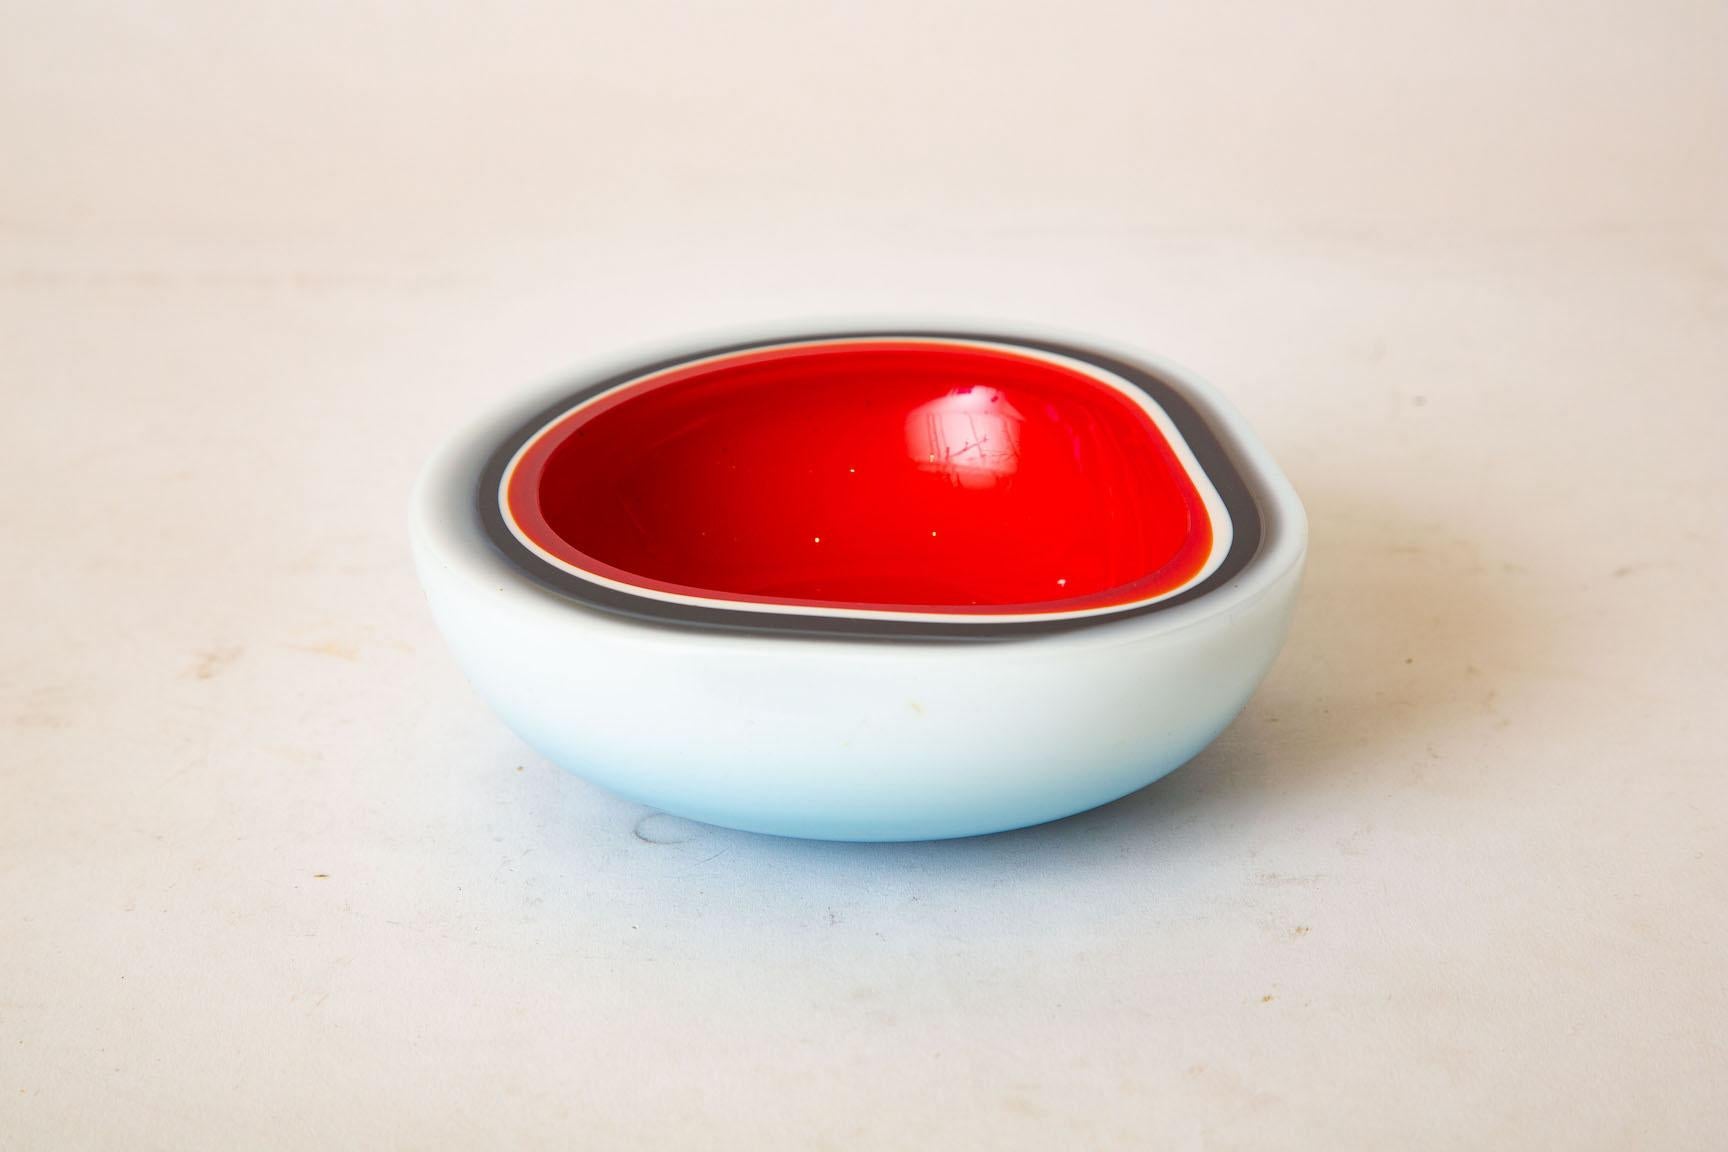 This wonderful vintage Italian Murano Flavio Poli triple cased glass bowl is unusual. It has white cased exterior, going into black glass line to a red interior. It is vintage from the 1960s. It is white cased with clear with a red interior and a